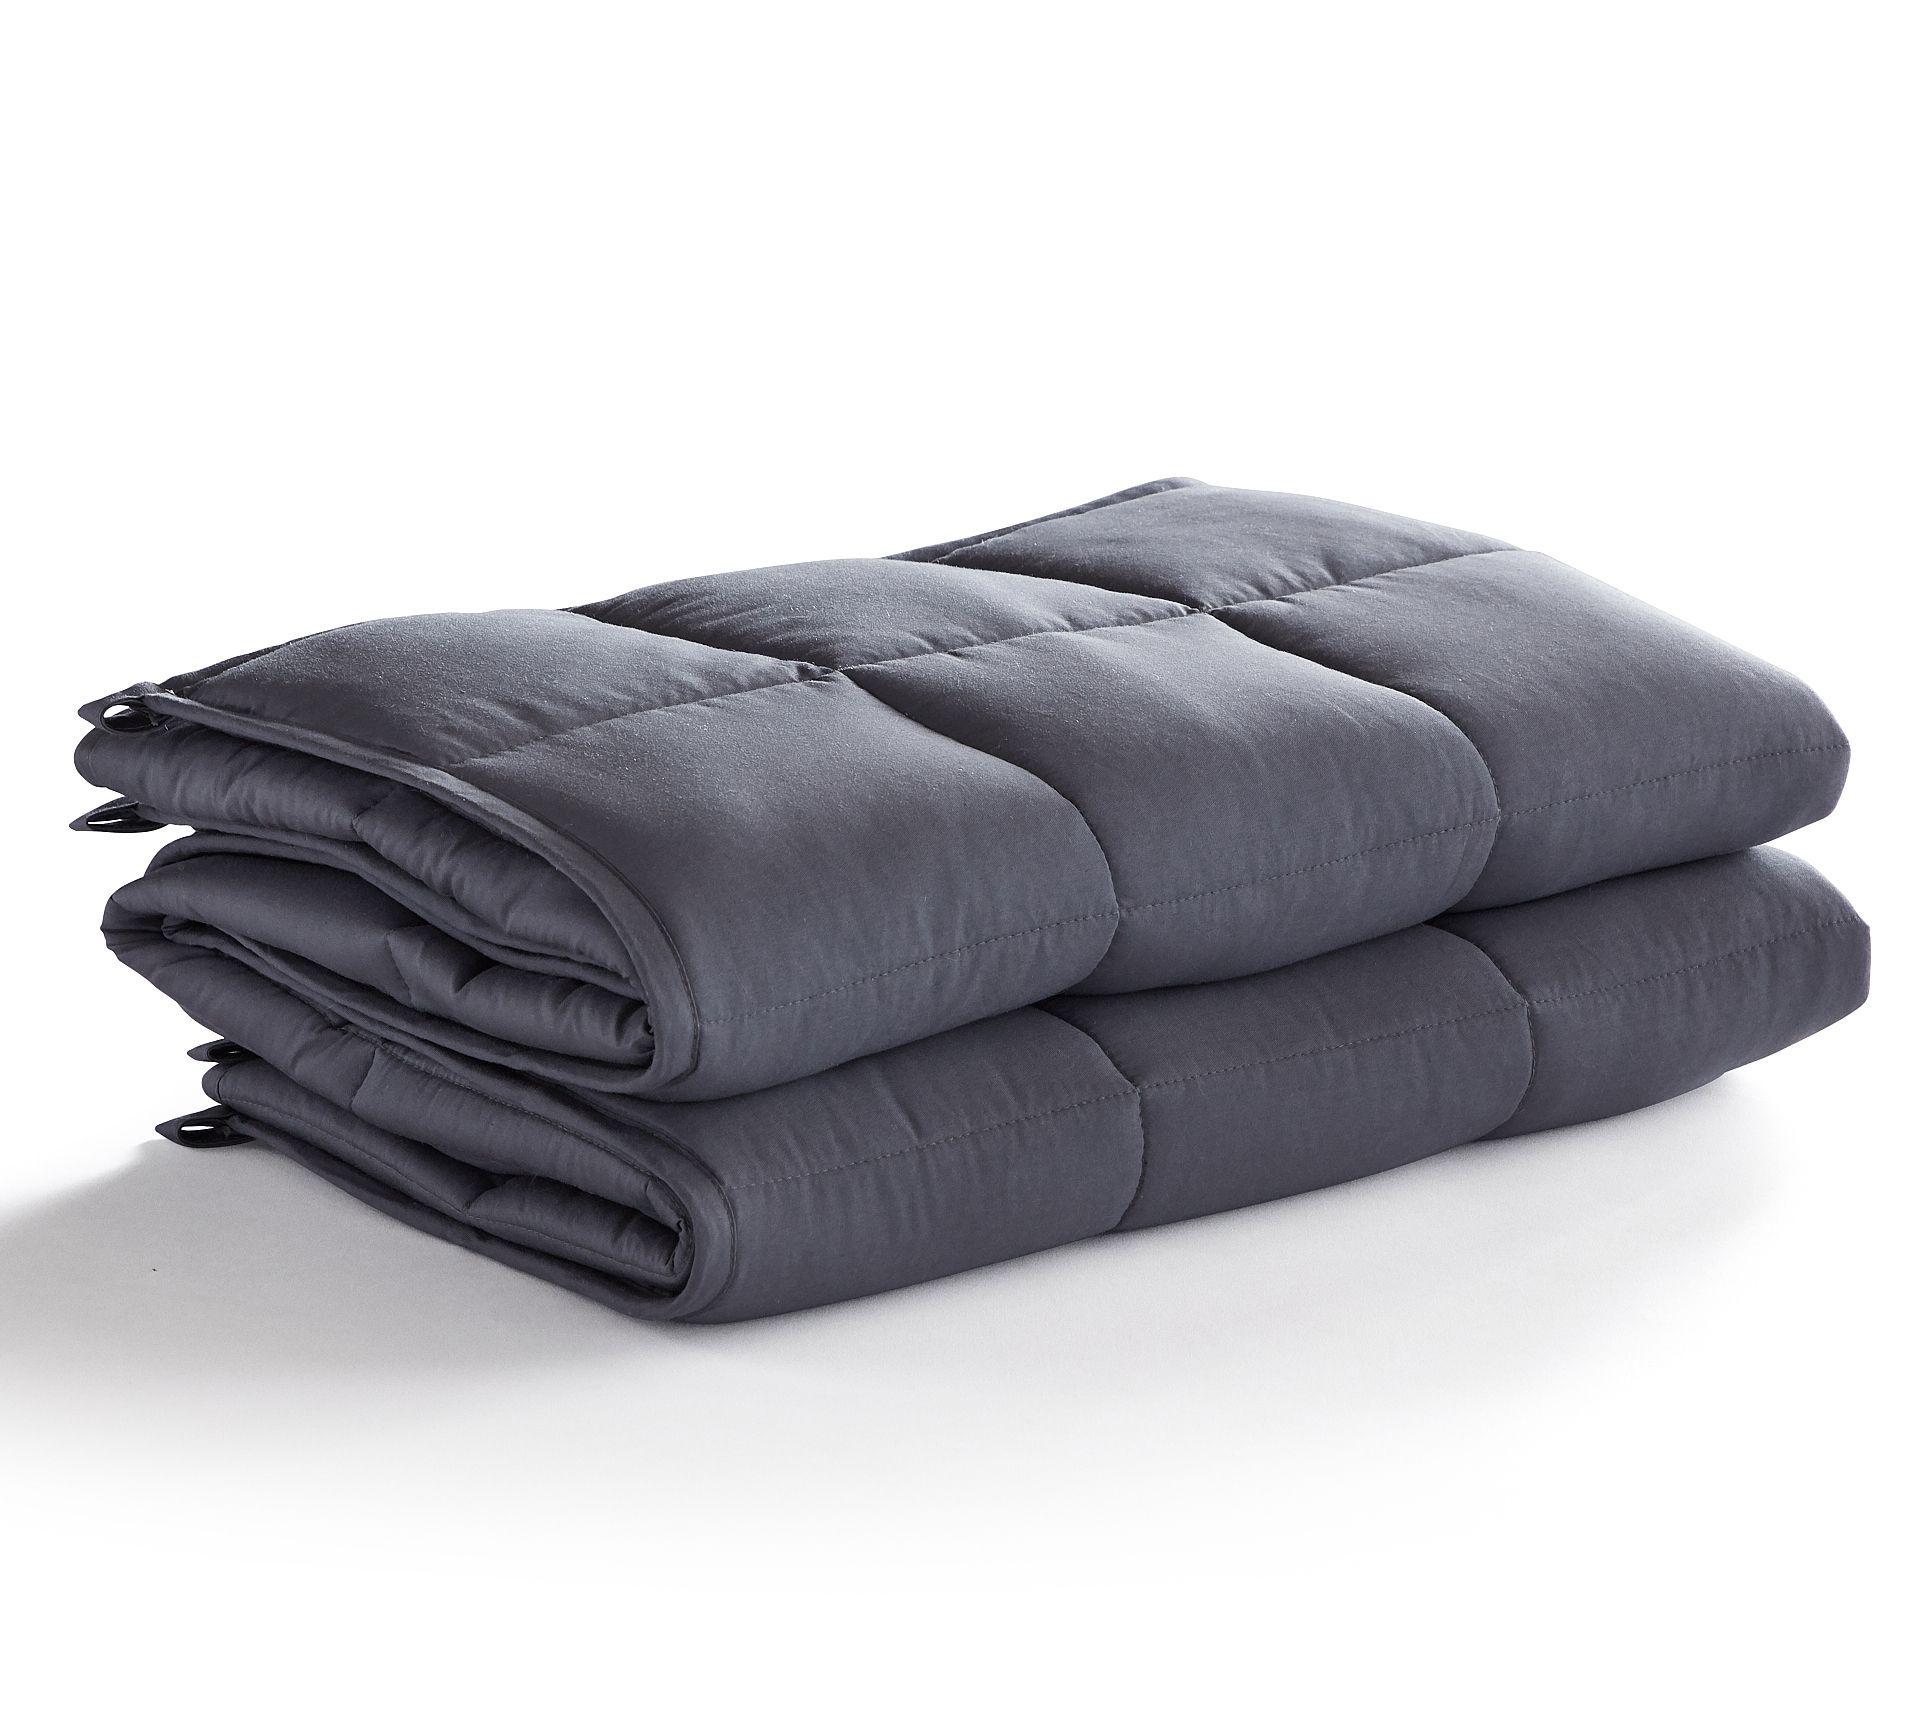 A weighted blanket helps reduce stress and anxiety